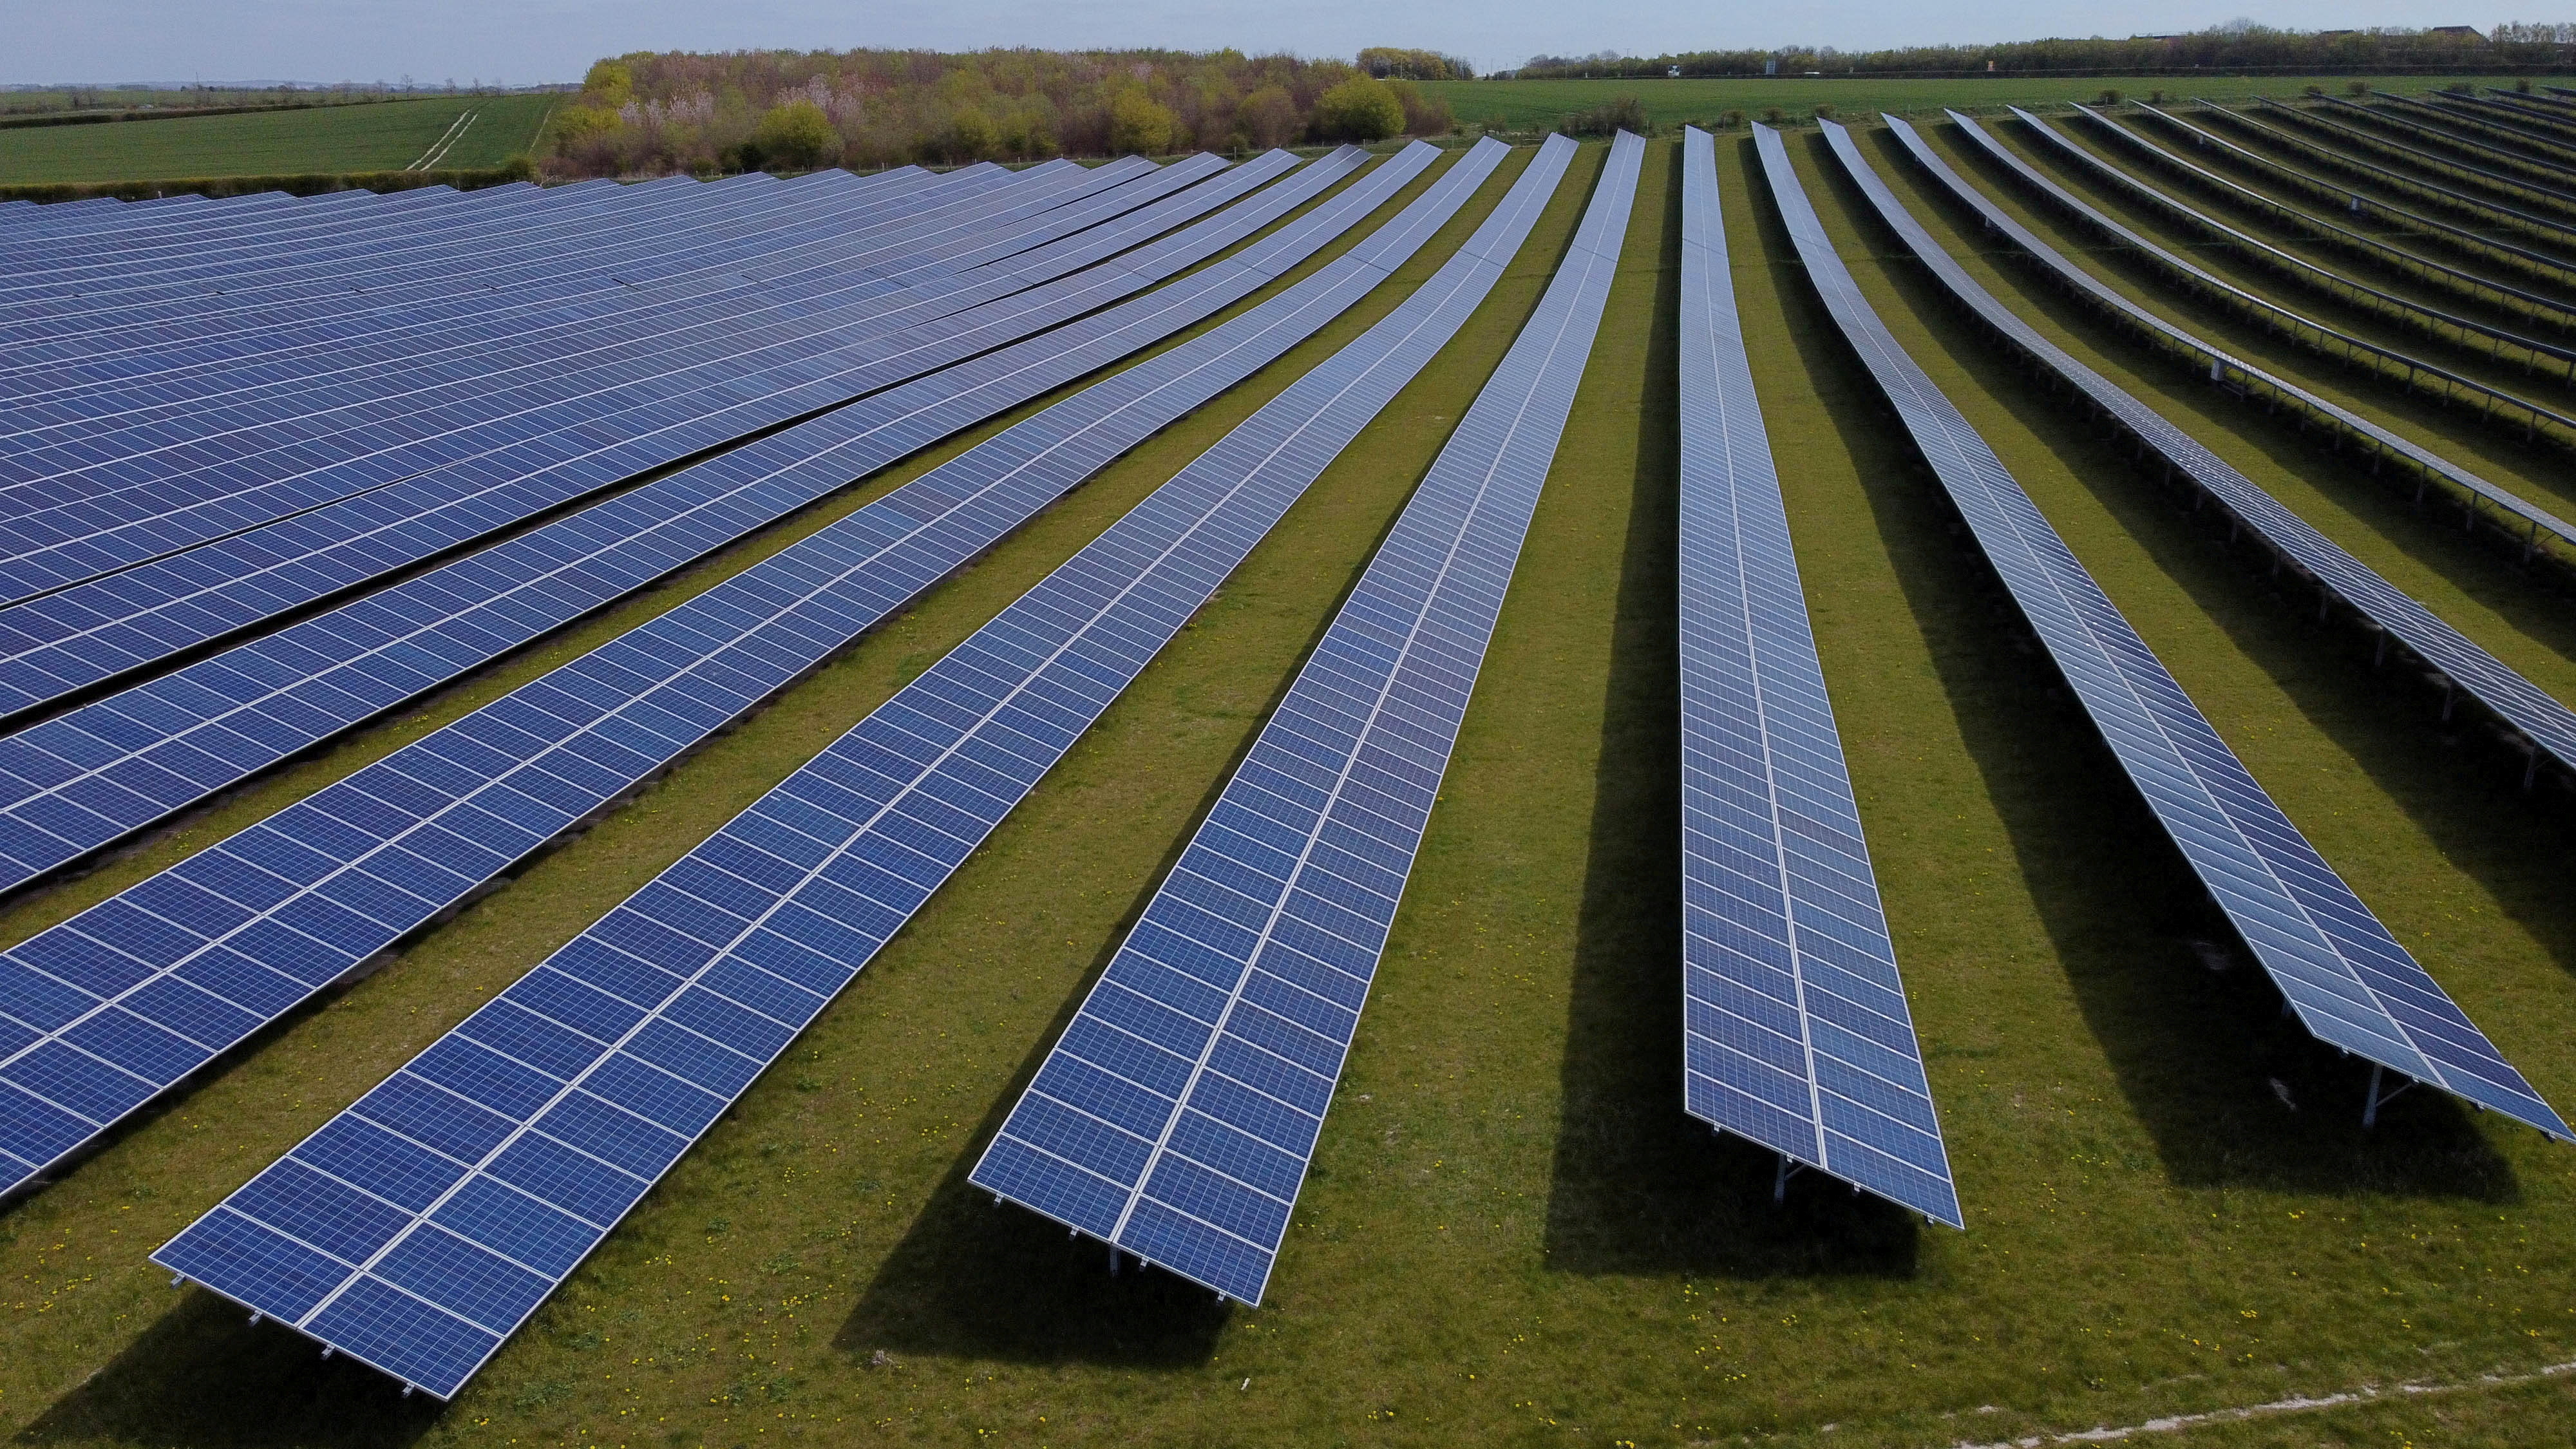 A field of solar panels is seen near Royston, Britain, April 26, 2021. Picture taken with a drone. REUTERS/Matthew Childs